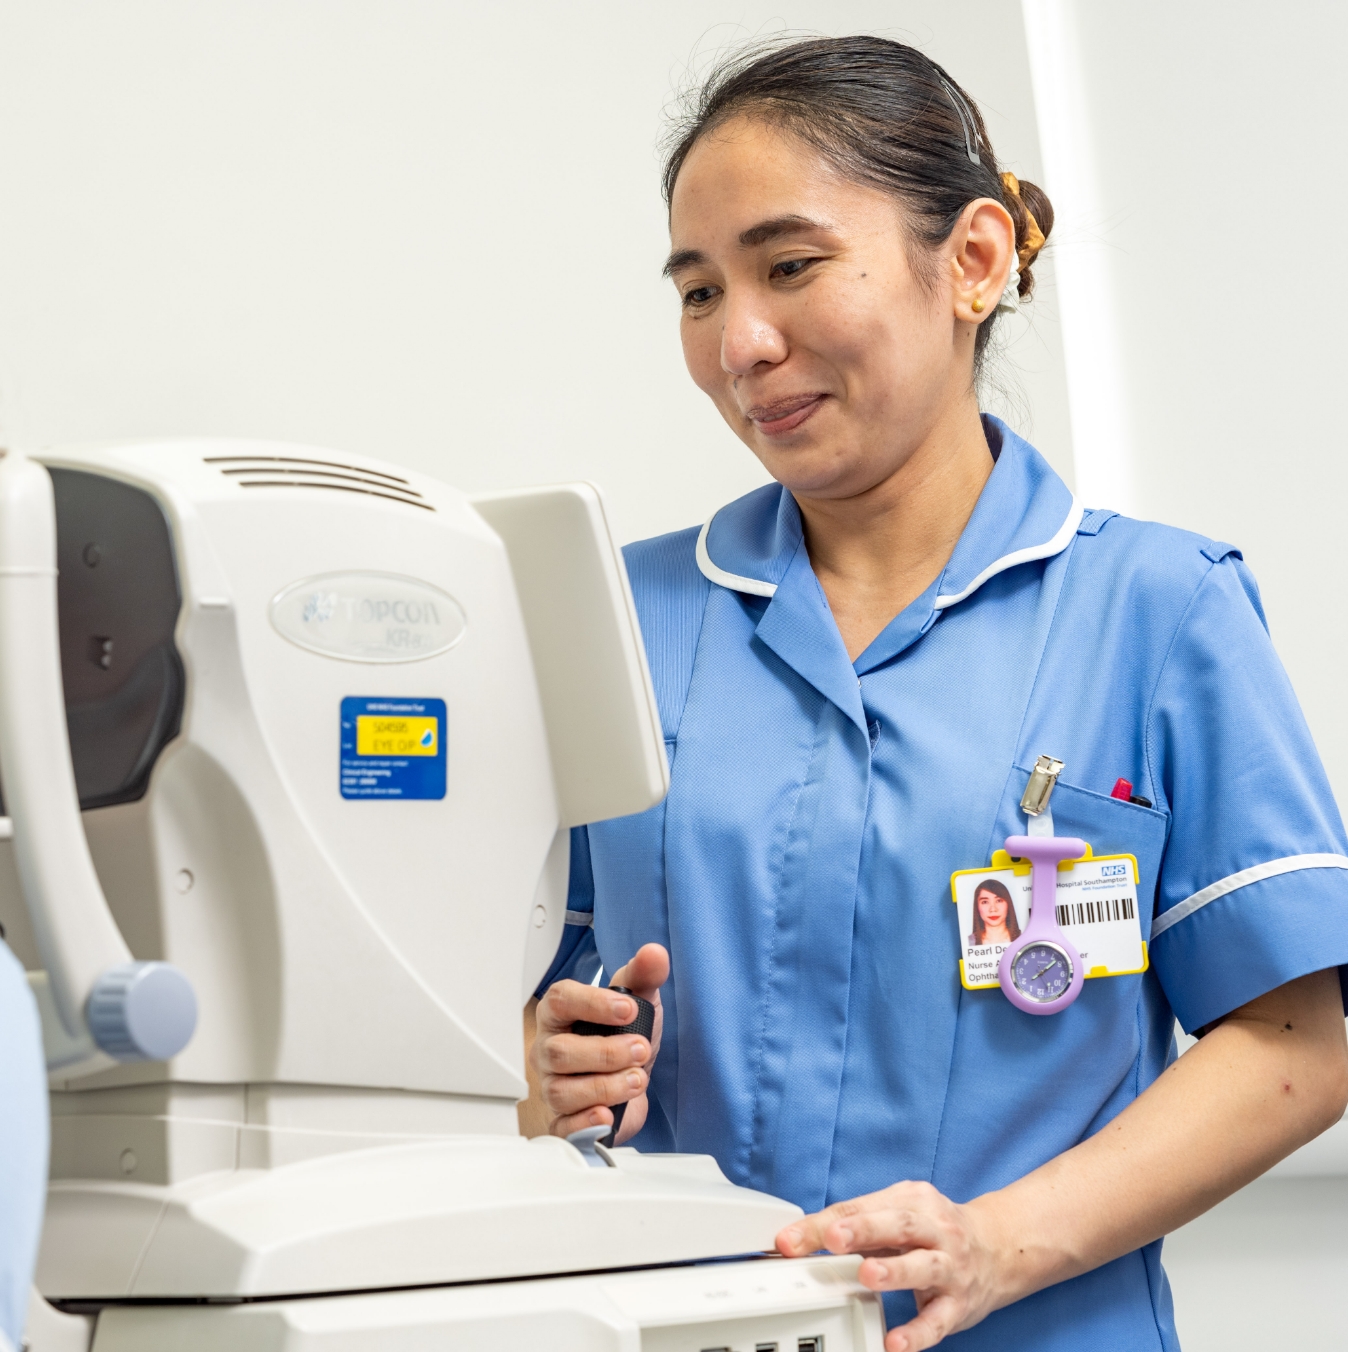 A female nurse in blue scrubs operating an eye examination machine, focusing attentively on her task.